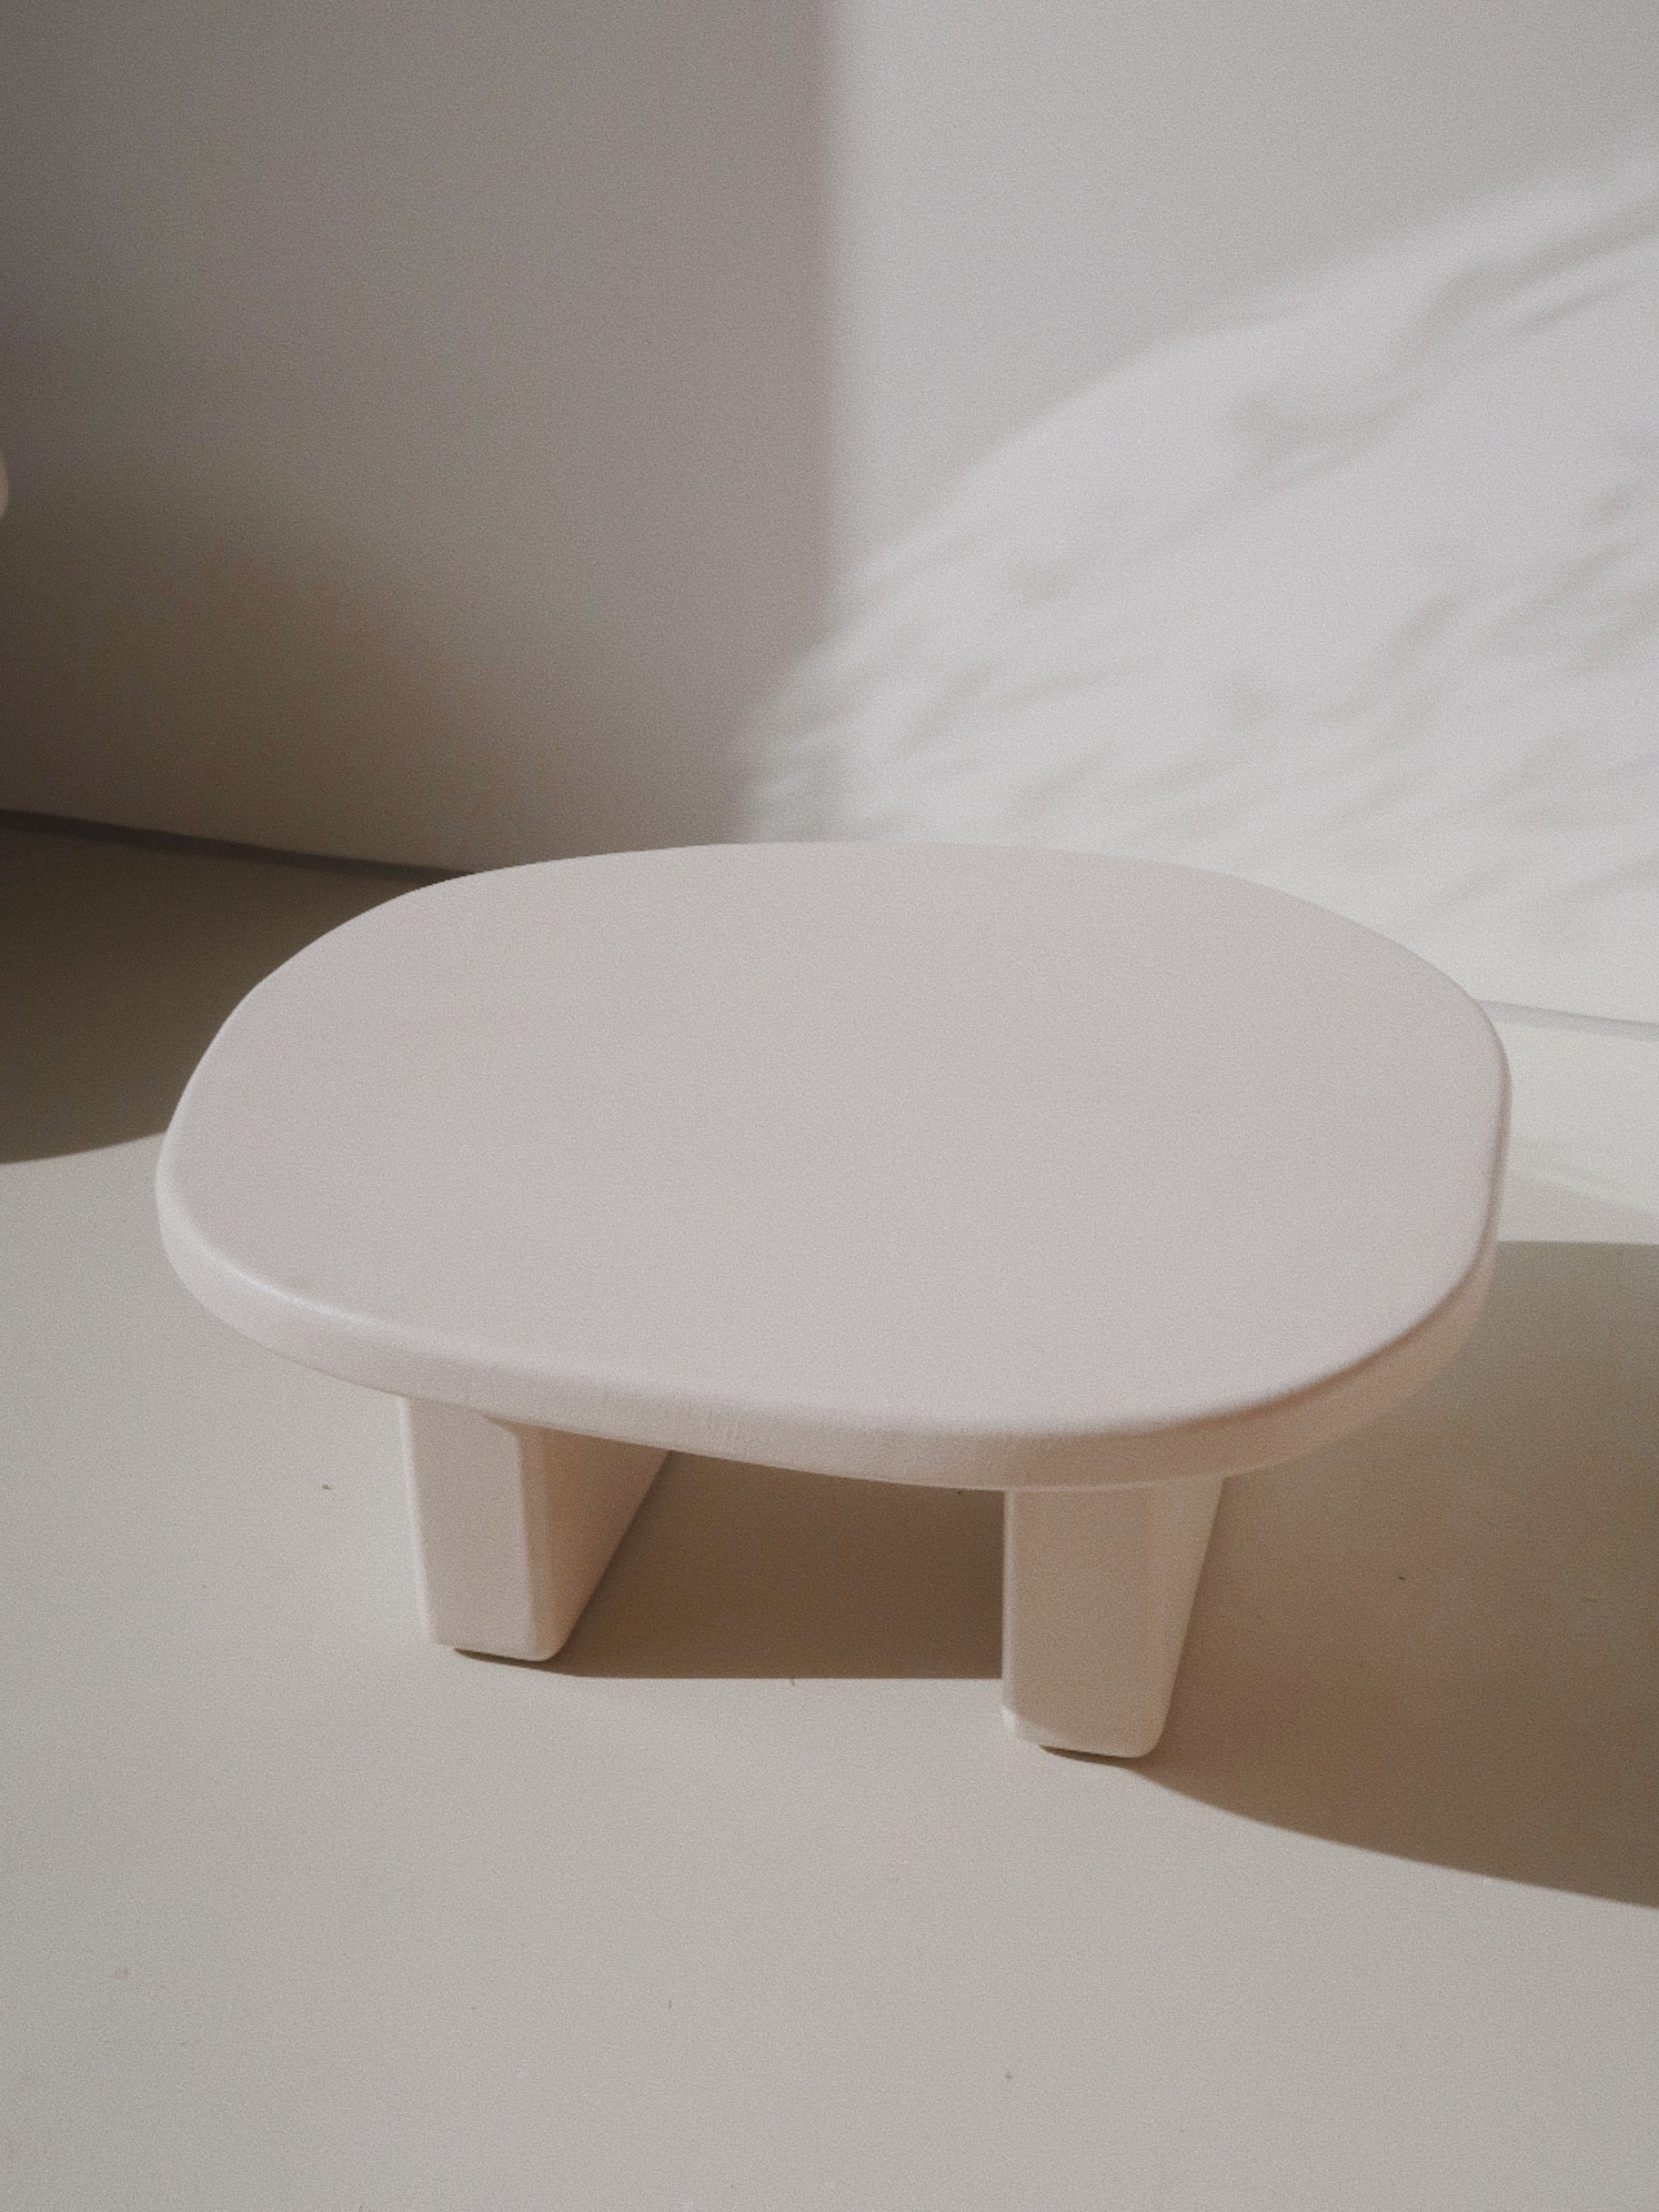 Sola Coffee Table in Natural Beige